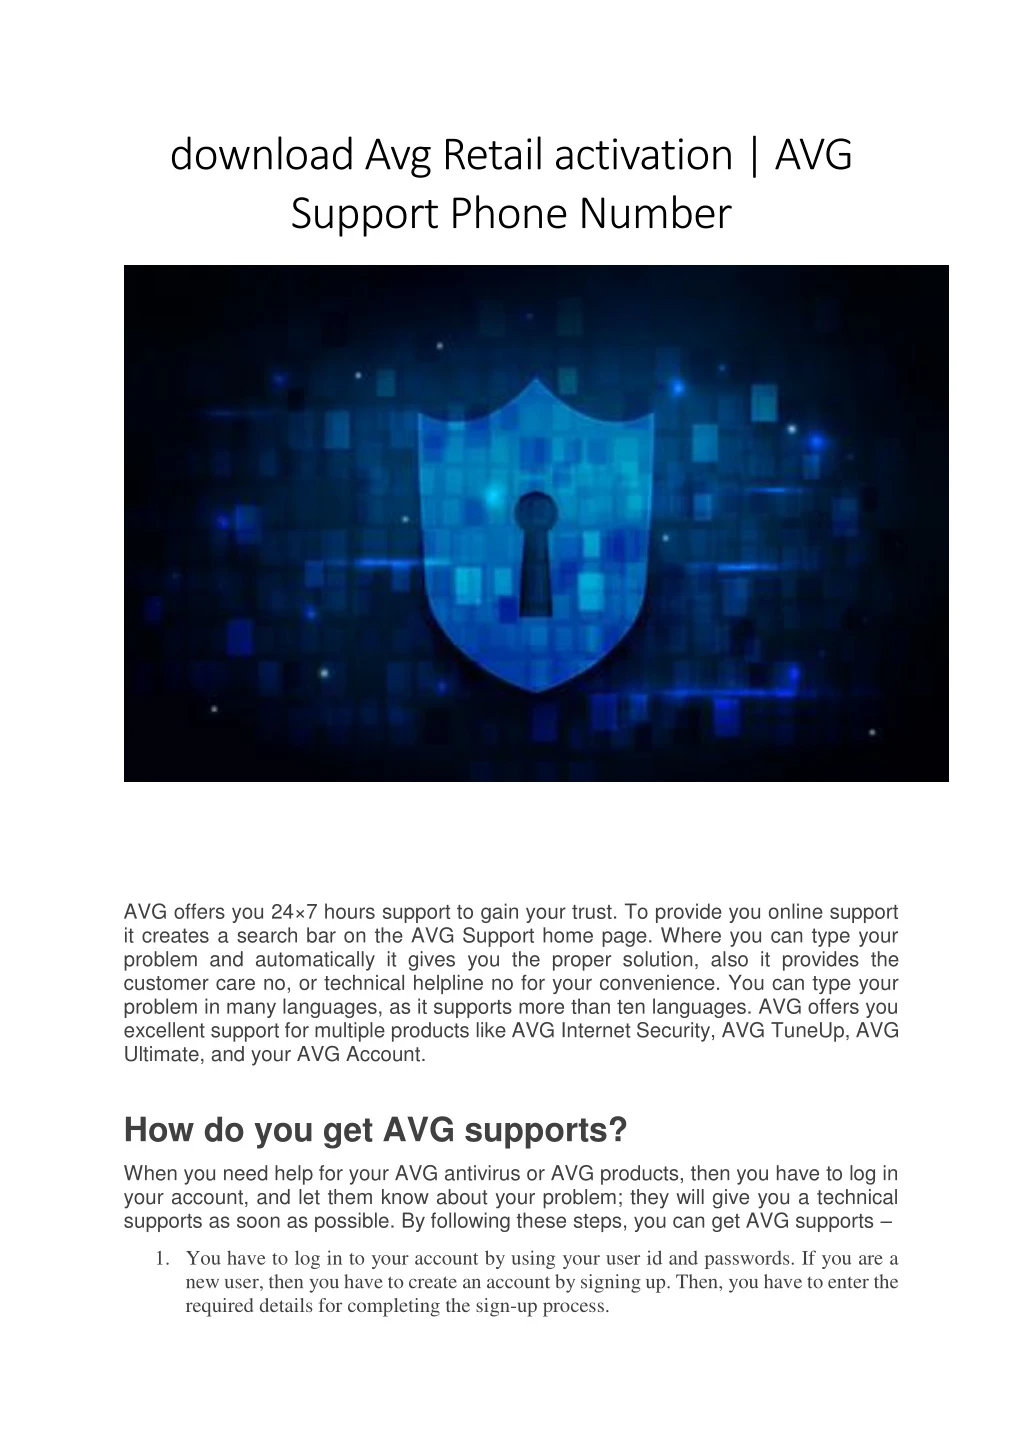 download avg retail activation avg support phone